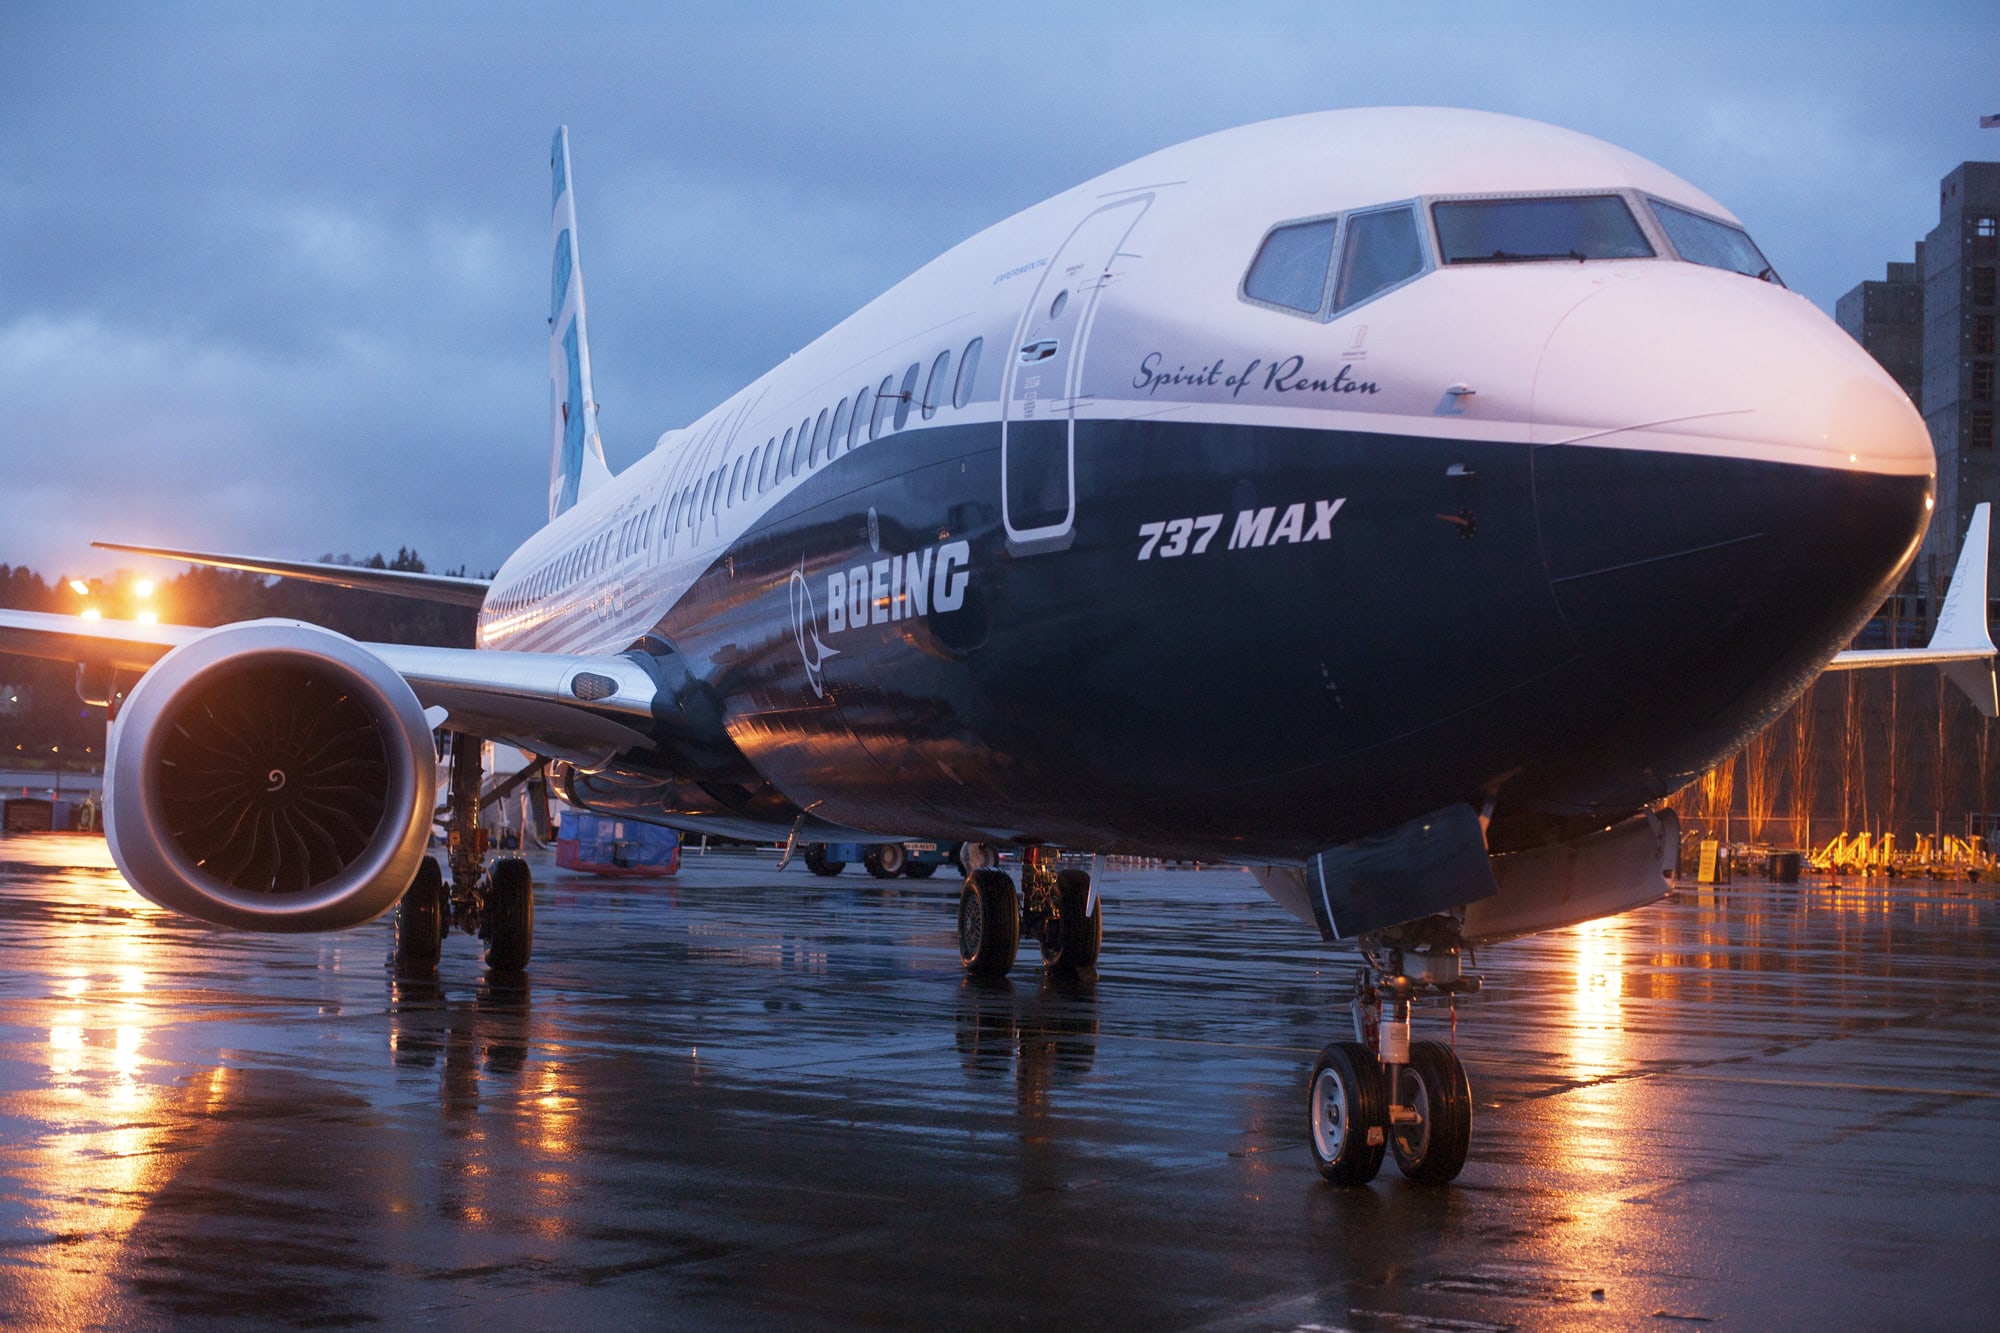 Boeing messages reveal efforts to control regulators of 737 Max